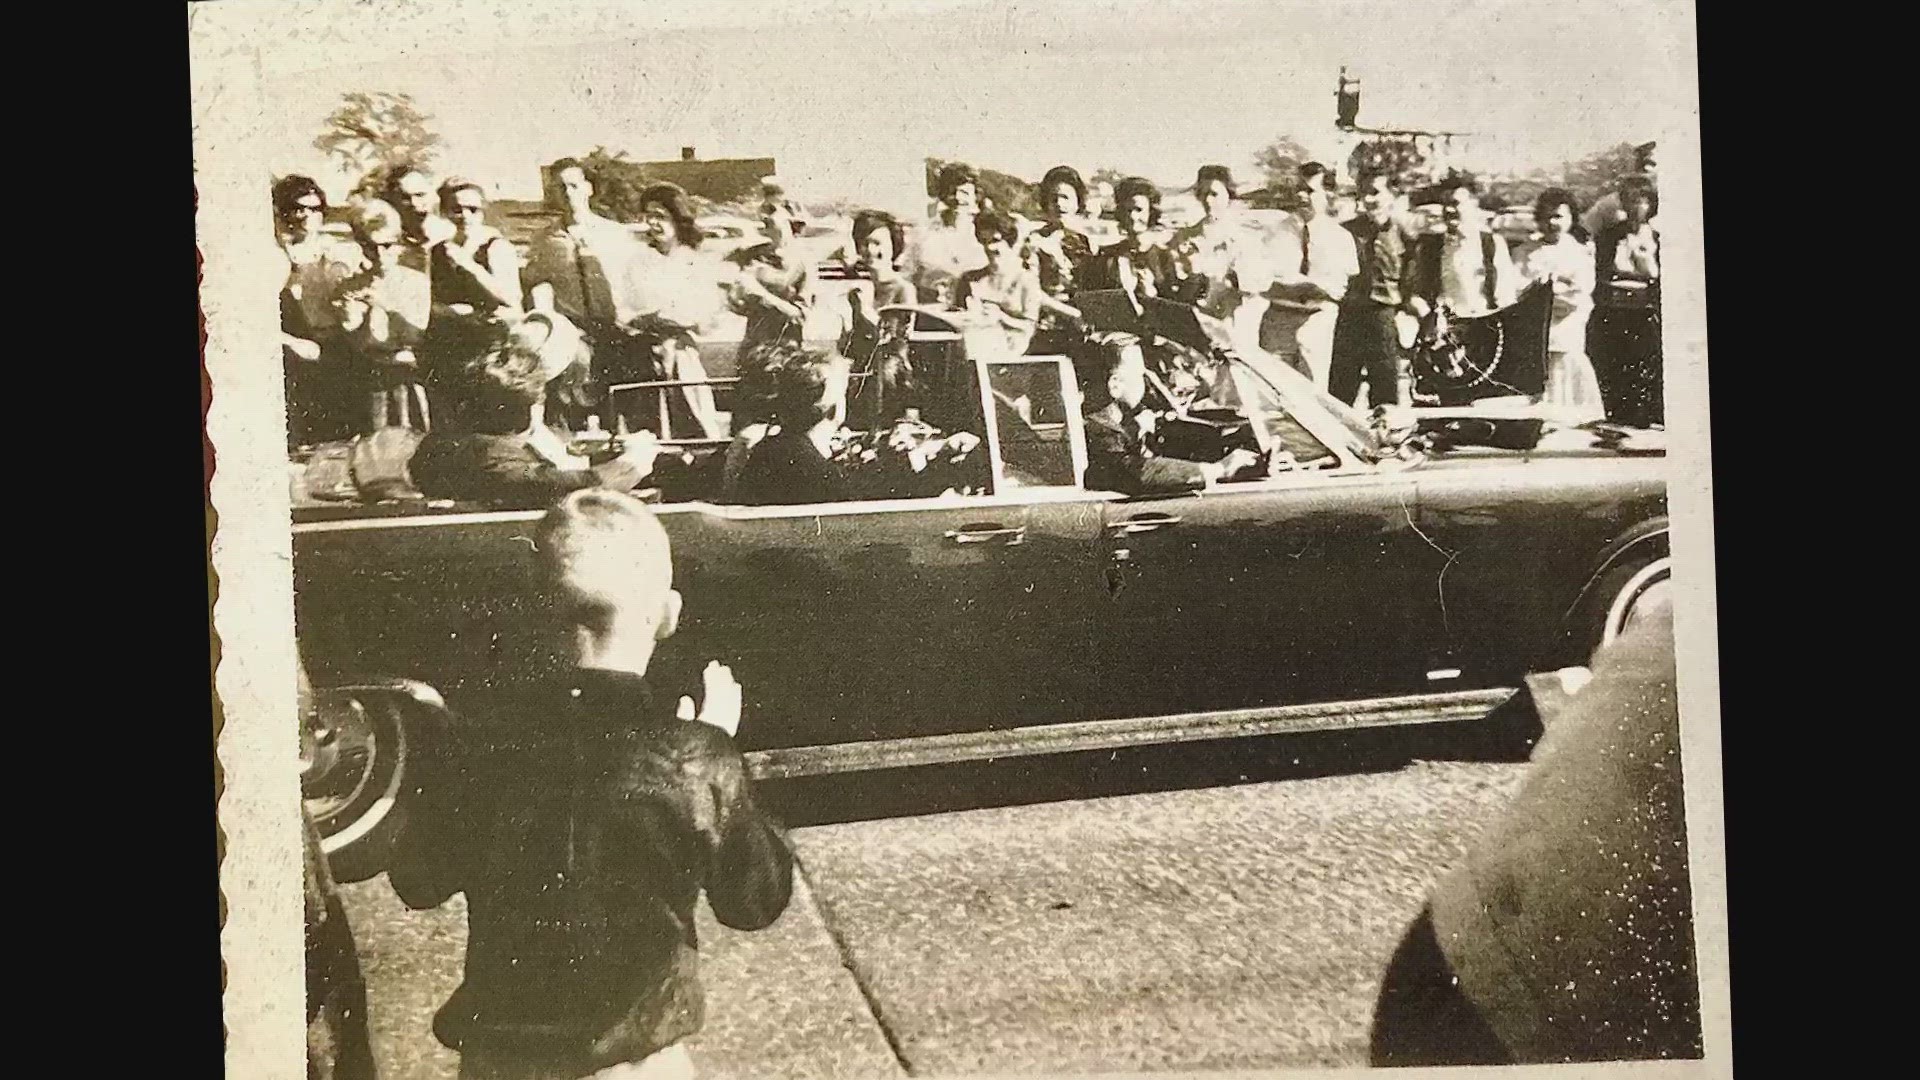 Jackie Baird was a Texas Instruments secretary who rushed outside to see the President's motorcade as it left Love Field on November 22, 1063.